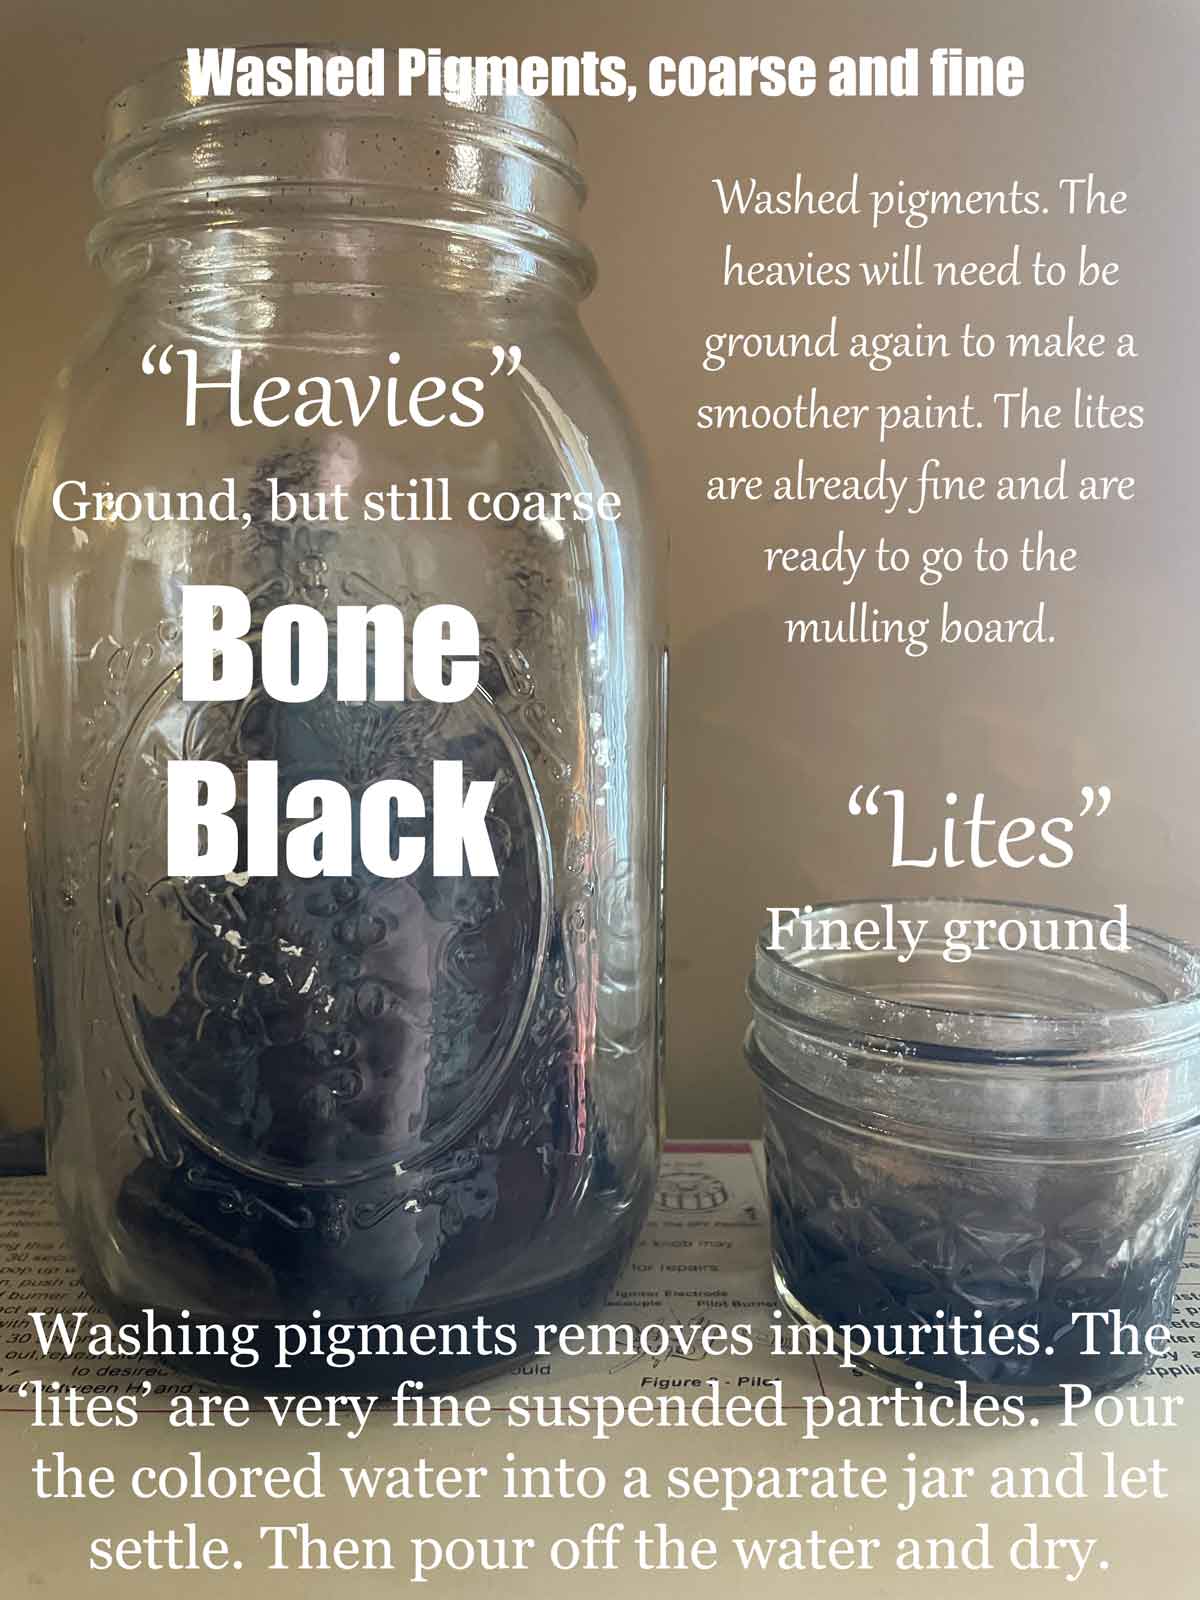 Making pigment from charred bones.